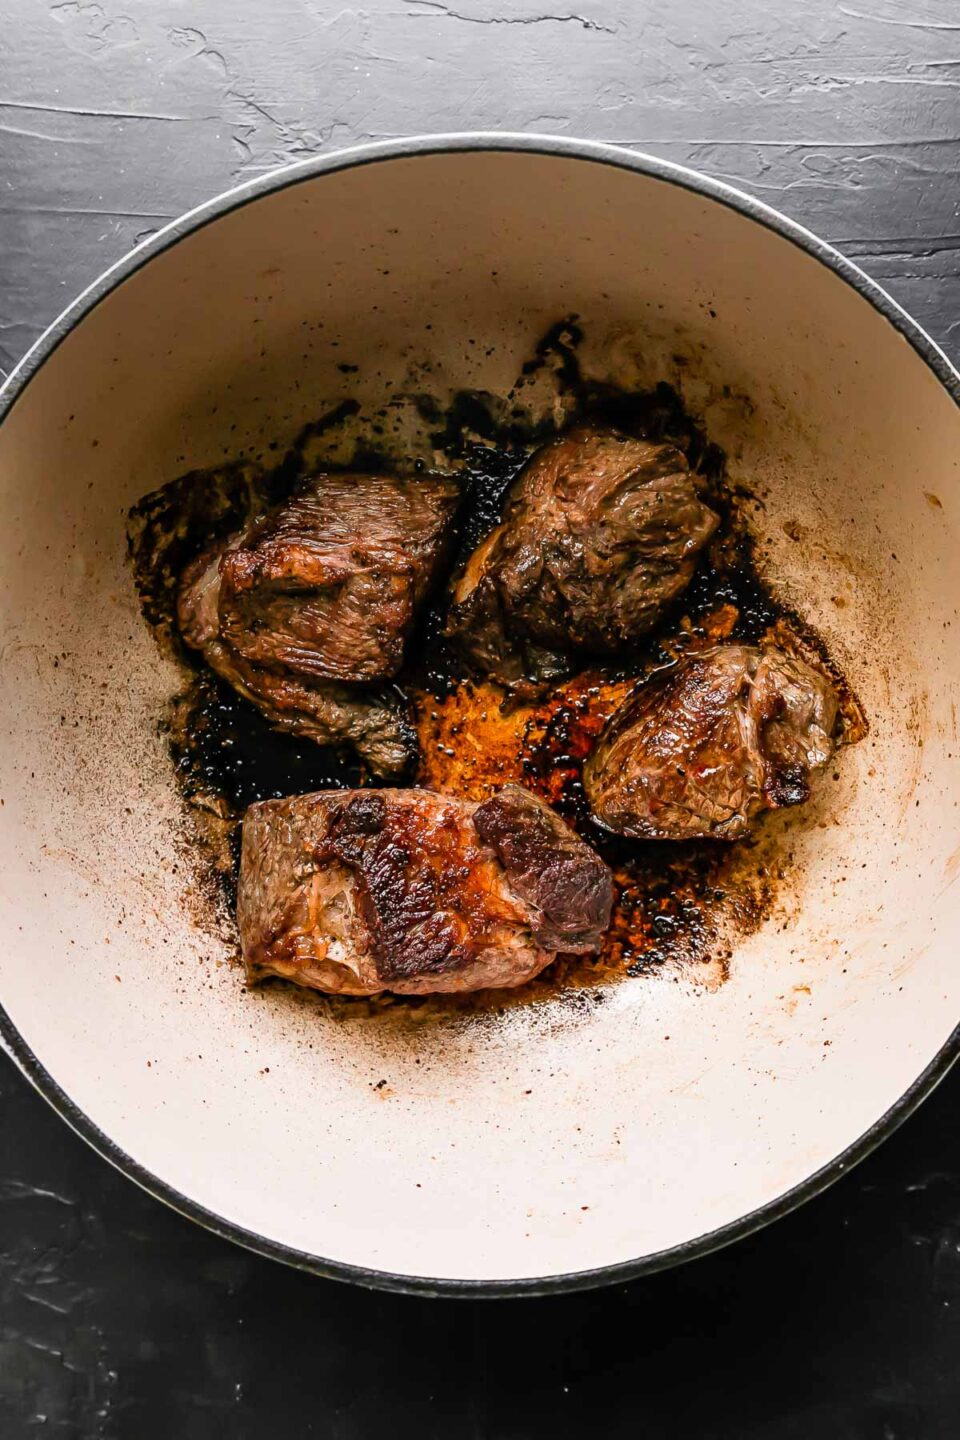 How to make braised beef ragu, step 1: Brown the beef. Browned beef chuck roast sections rest in the bottom of a large white pot that sits atop a black textured surface.